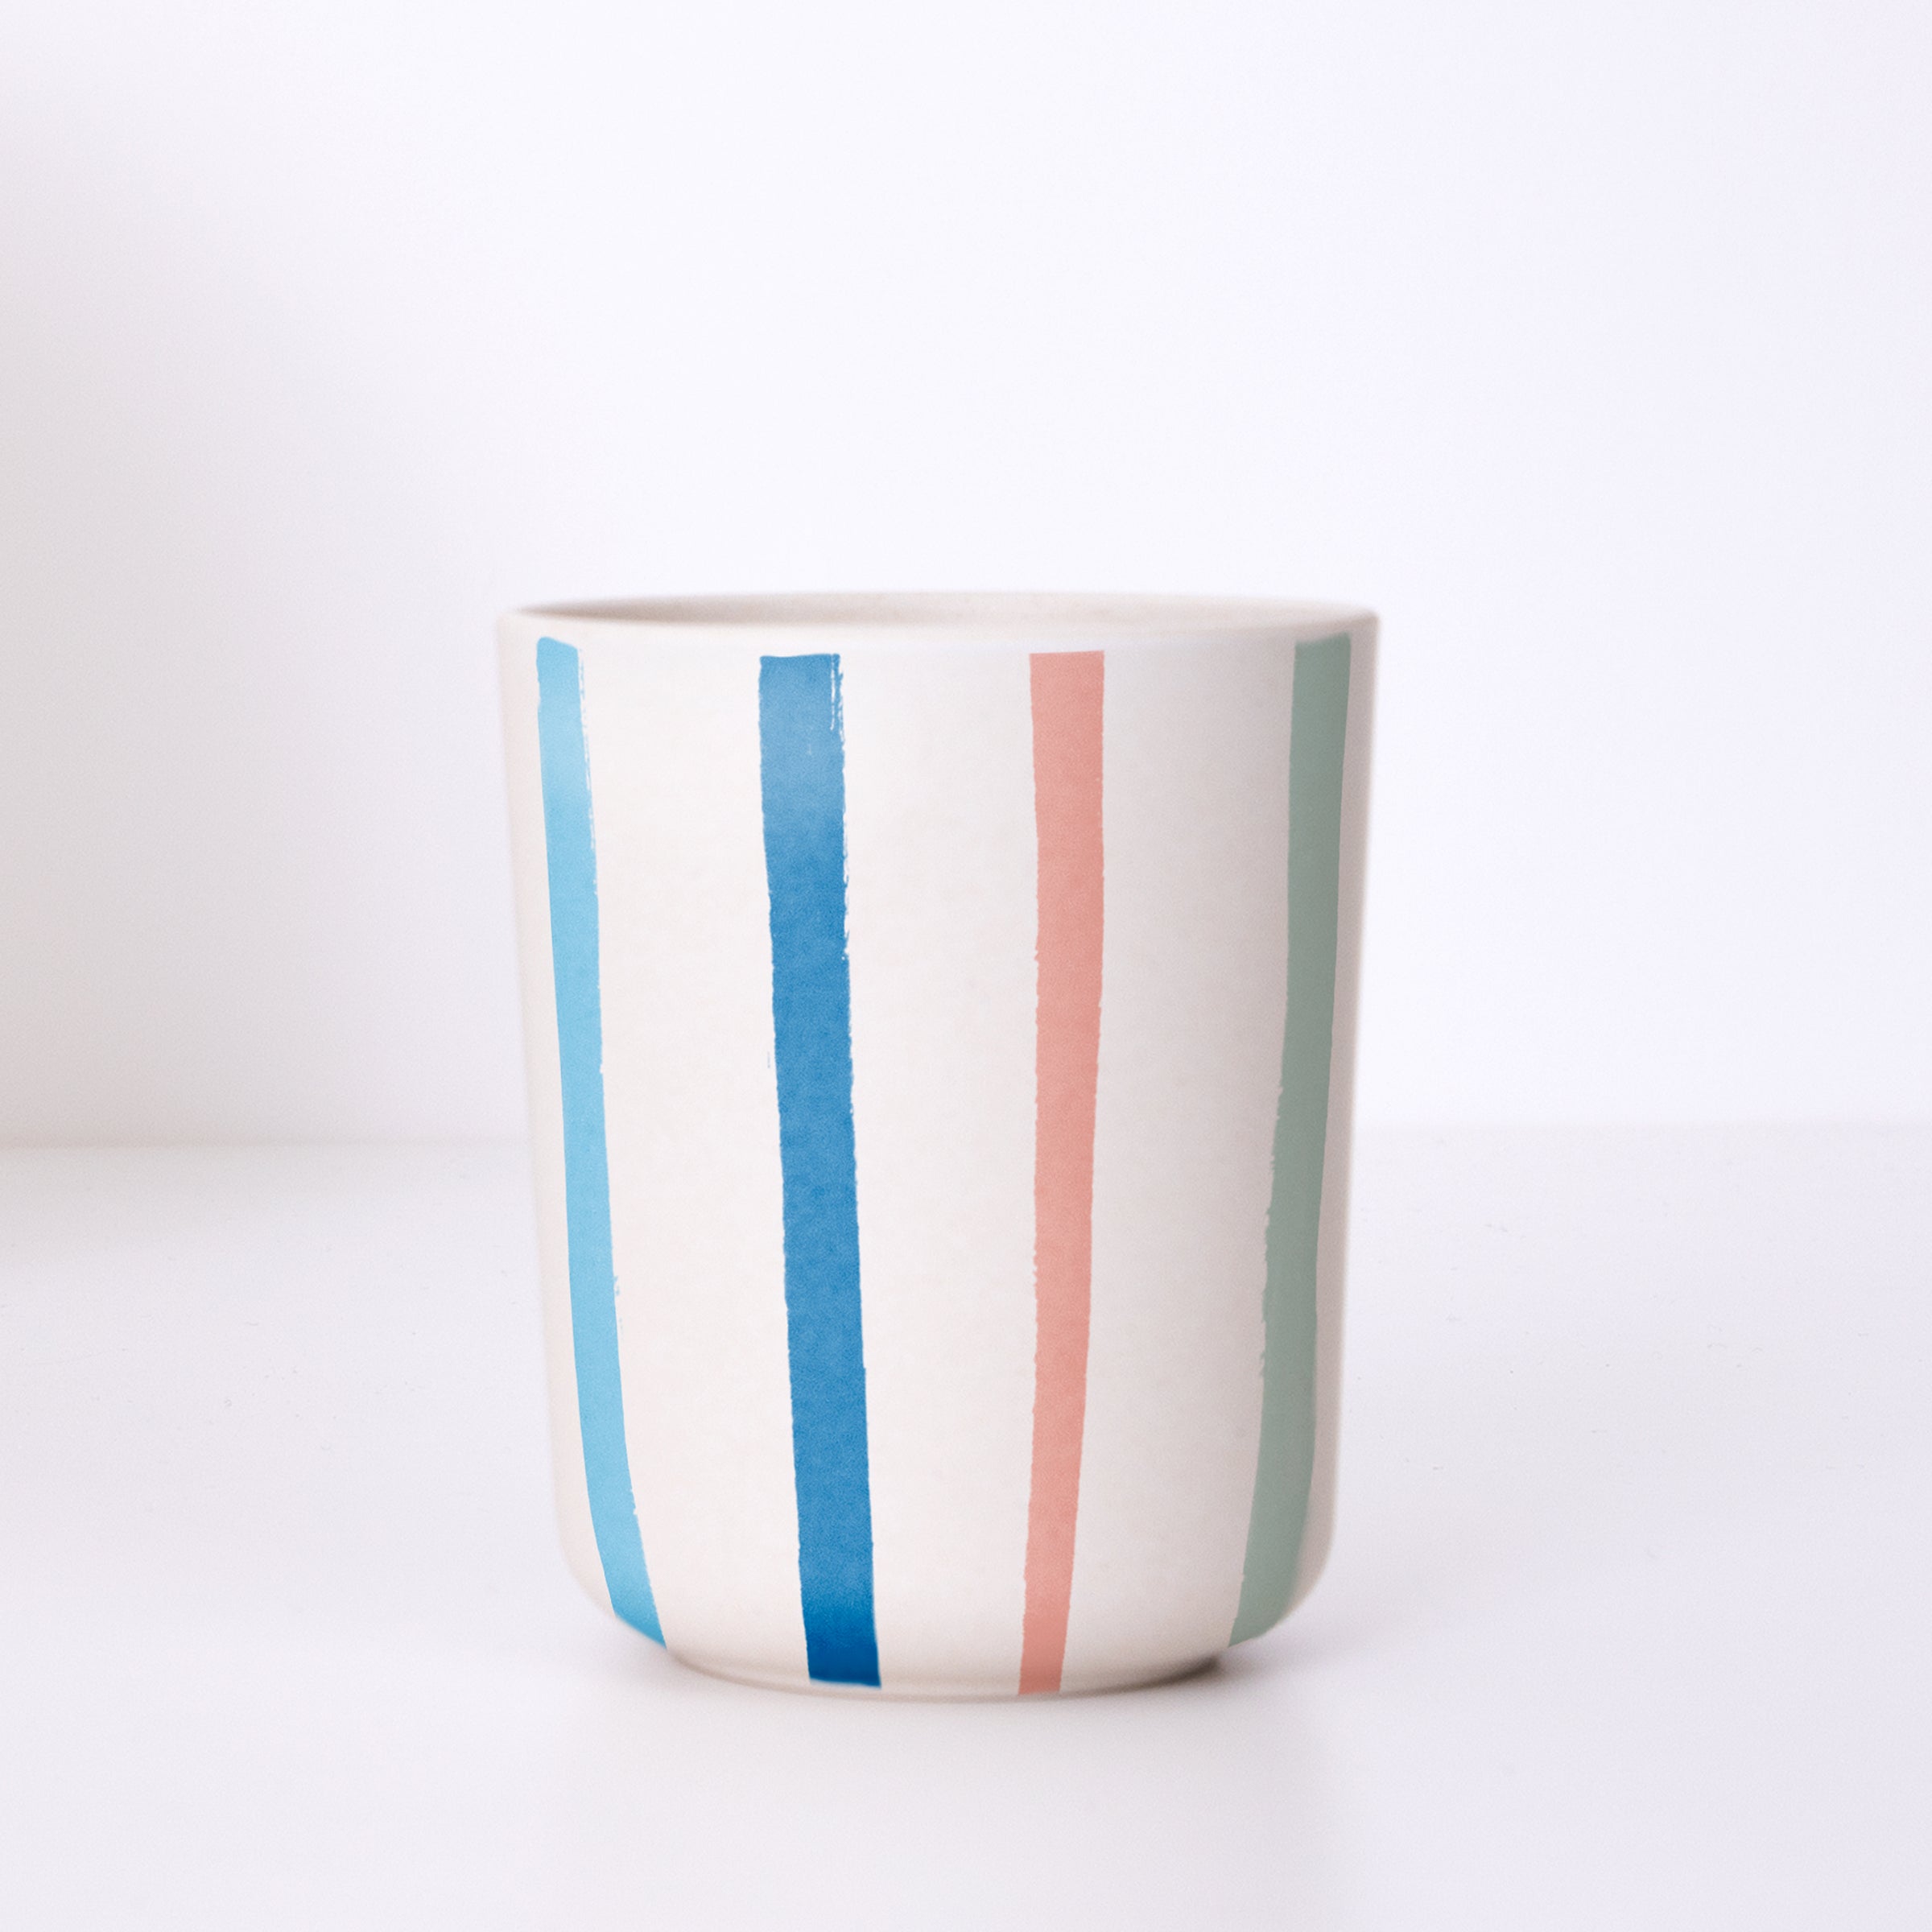 Our reusable cups, crafted from a bamboo fiber mix with a striped design, are the perfect party cups to use time and time again.